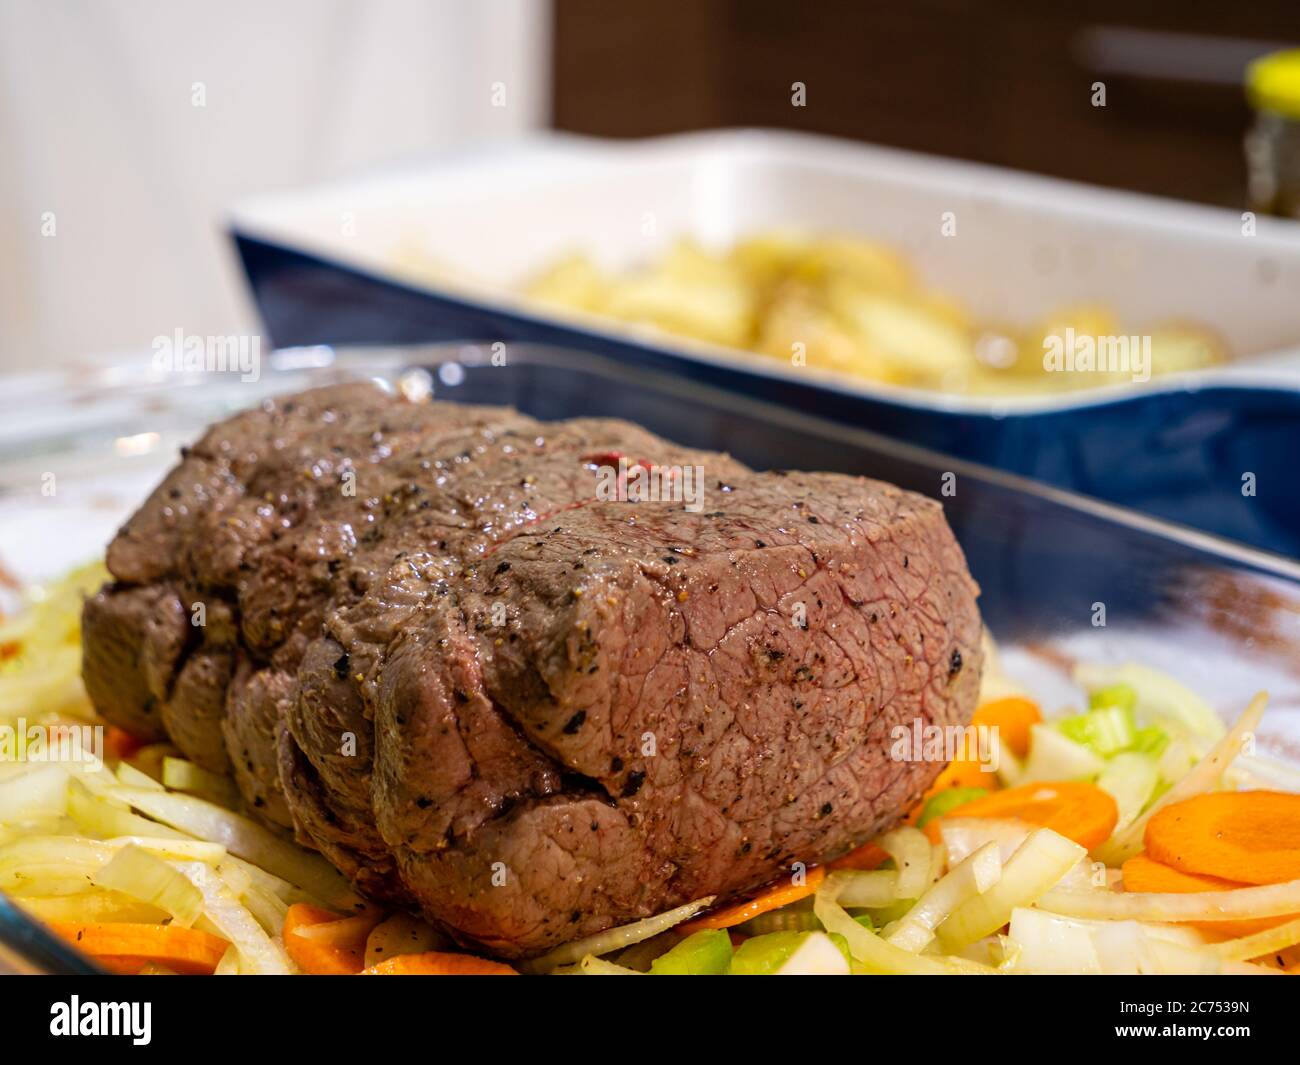 A traditional Sunday Roast meal of a topside roast beef and potatoes on a rustic checked tablecloth in a domestic kitchen Stock Photo